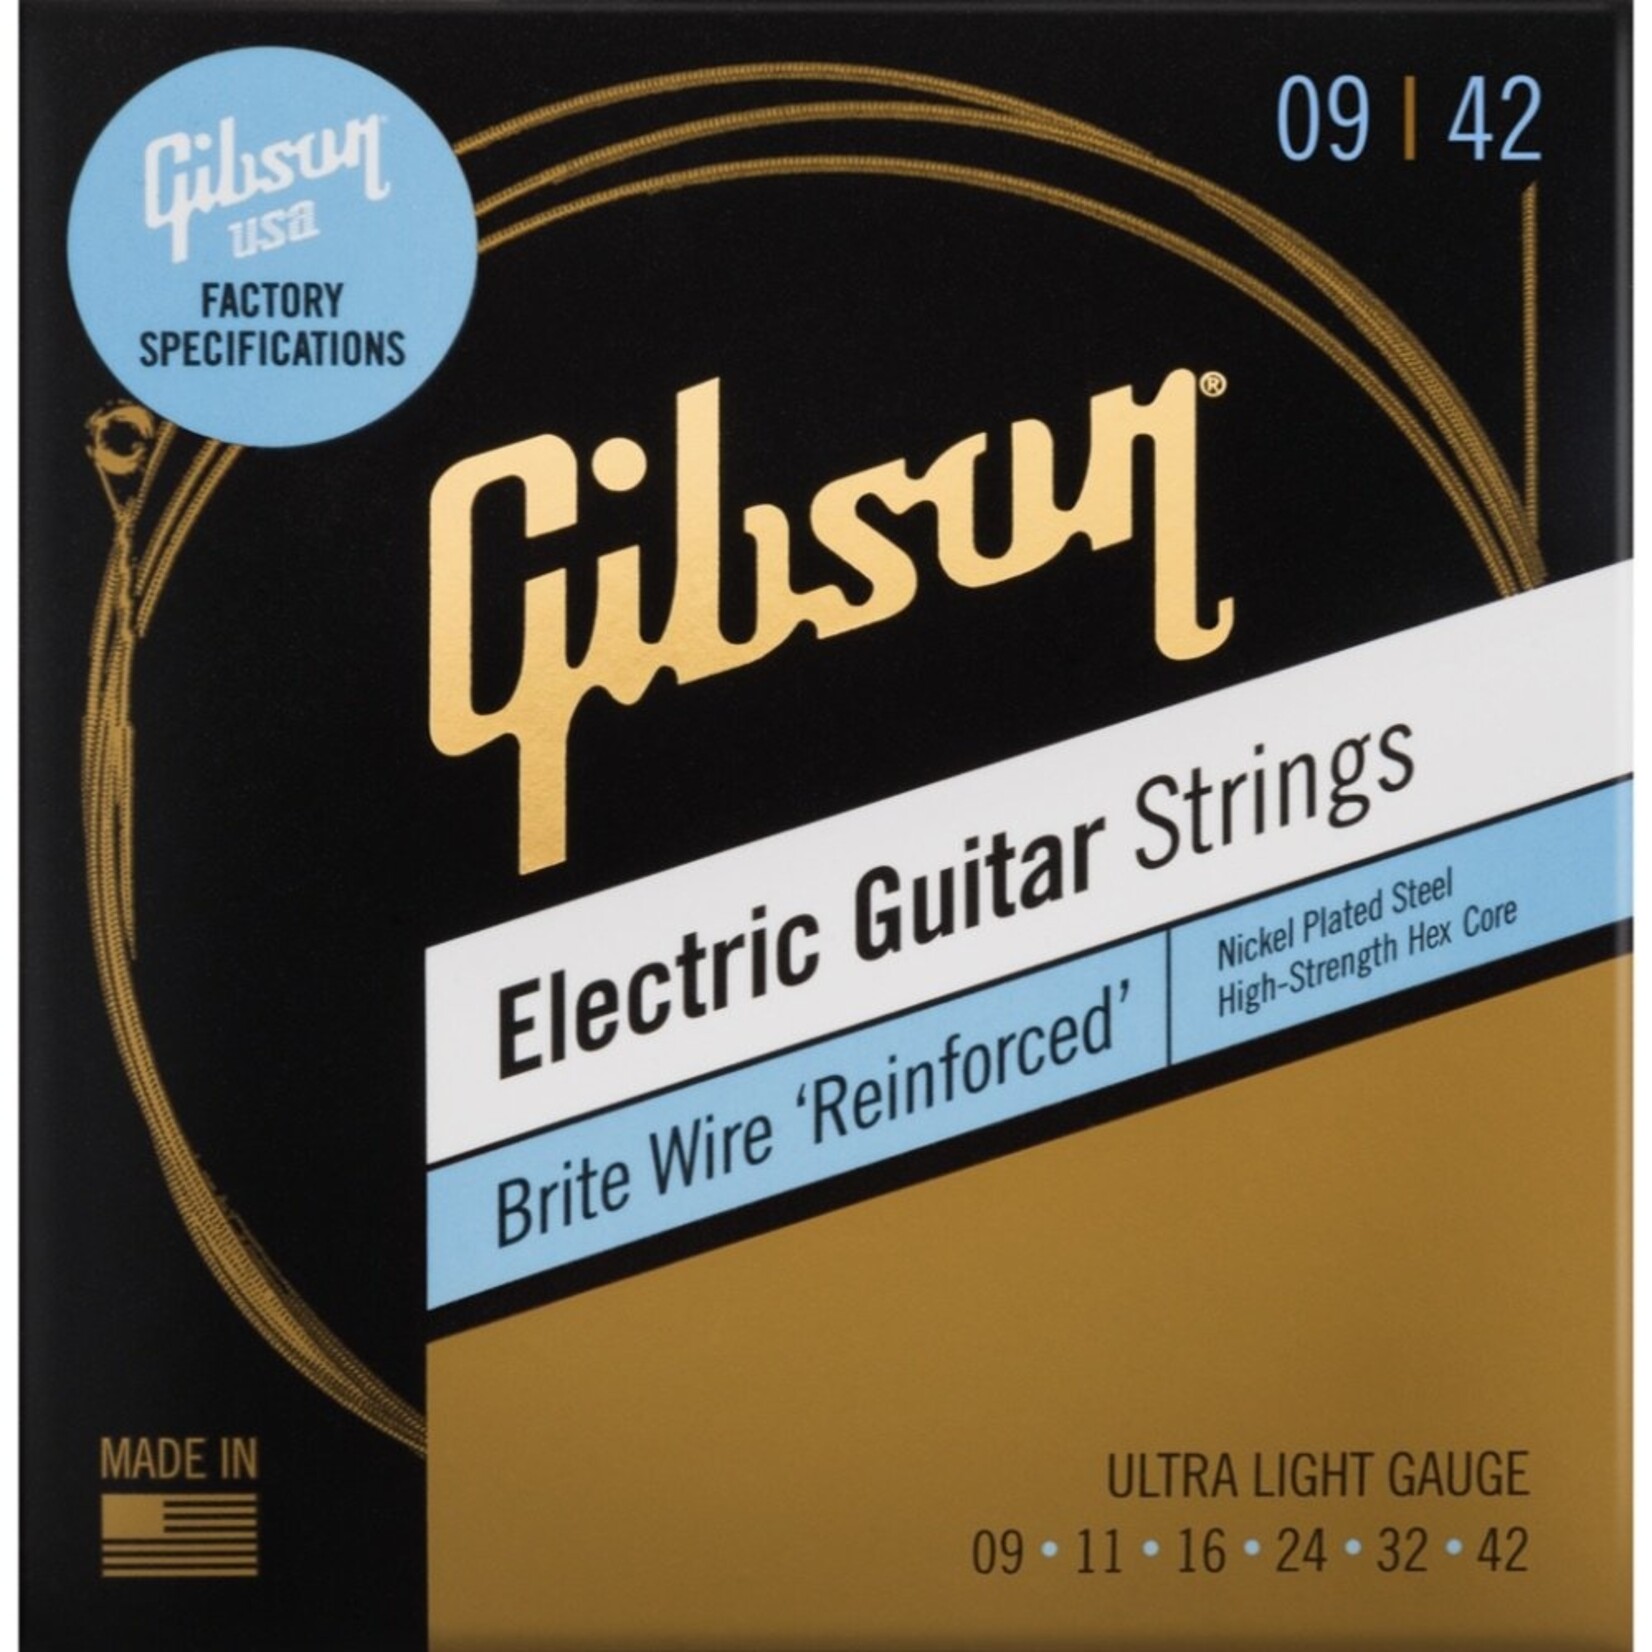 Gibson Brite Wire 'Reinforced' Electric Guitar Strings, Ultra-Light Gauge